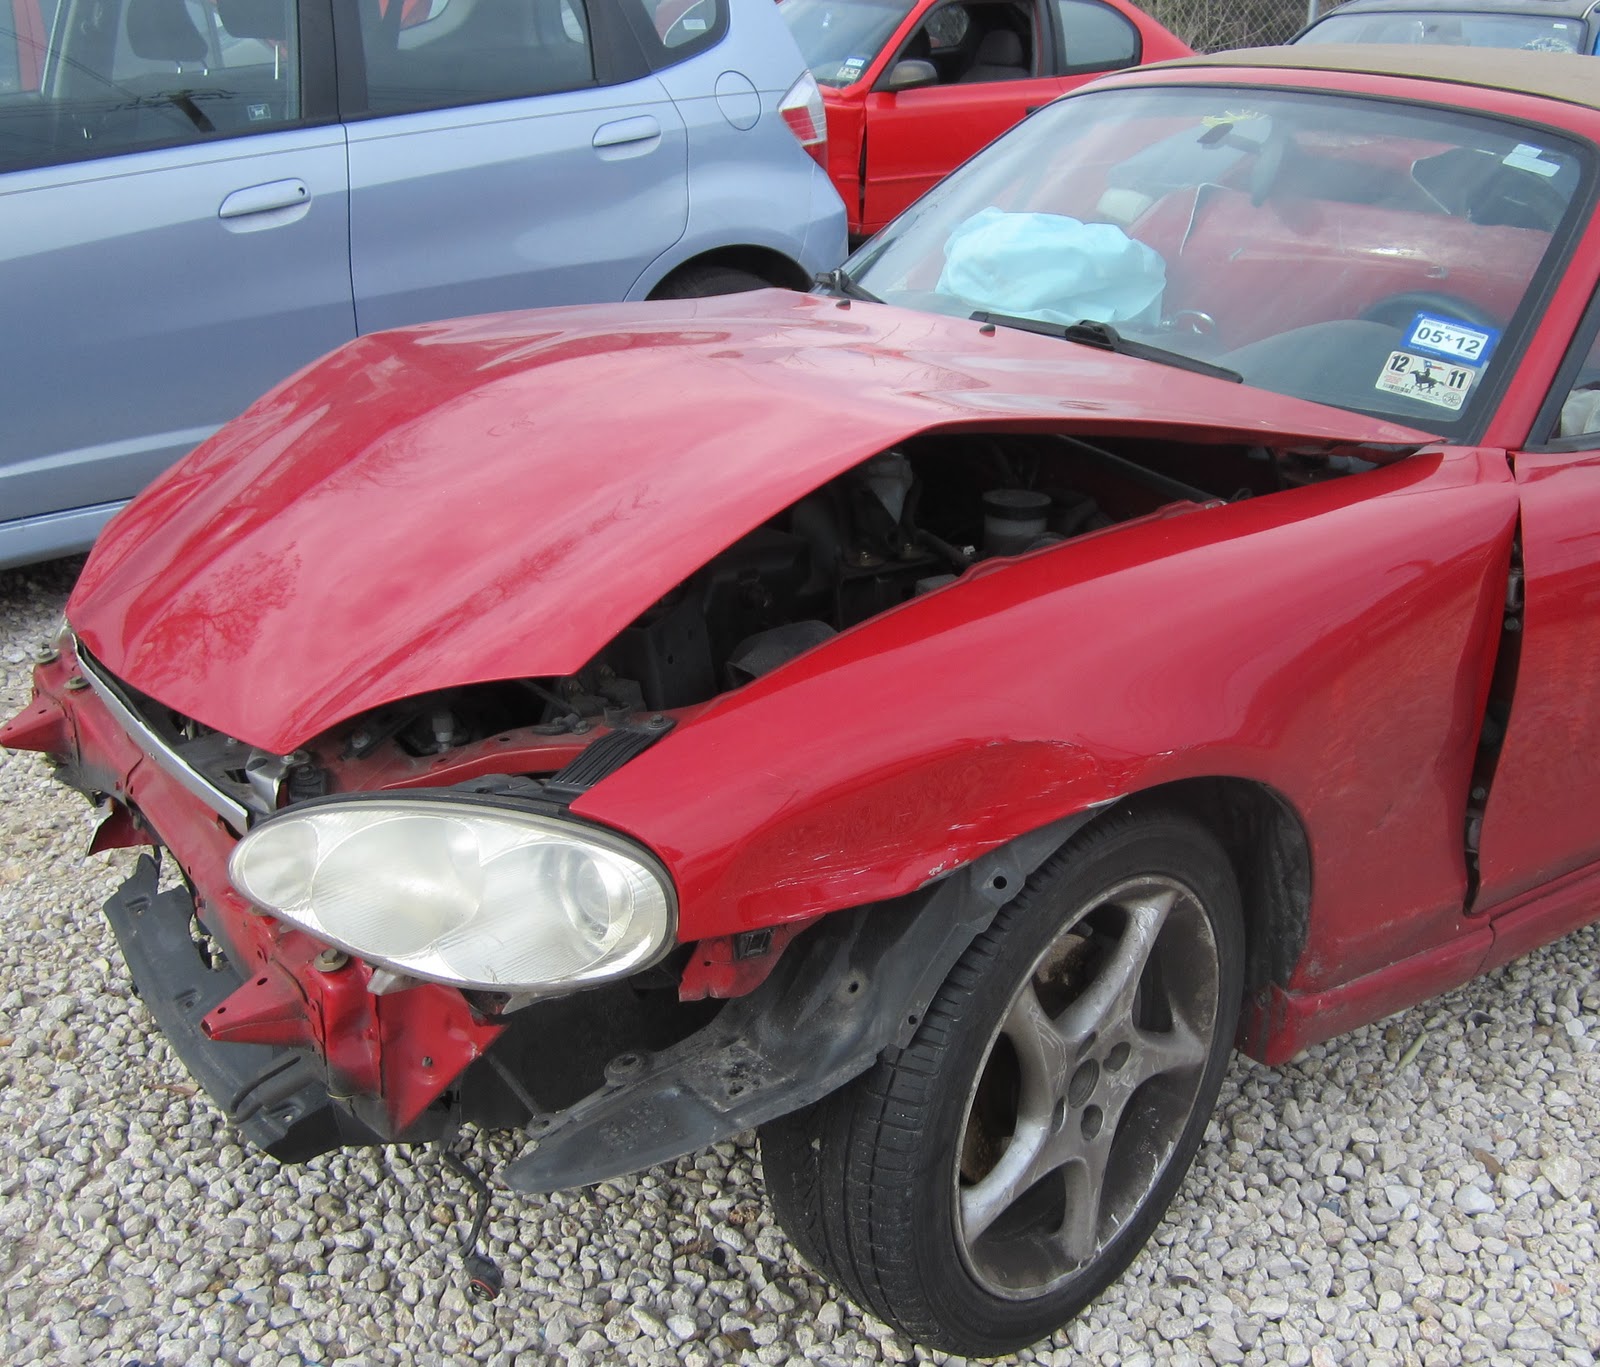  Broken  Cars Wallpapers High Quality Download Free